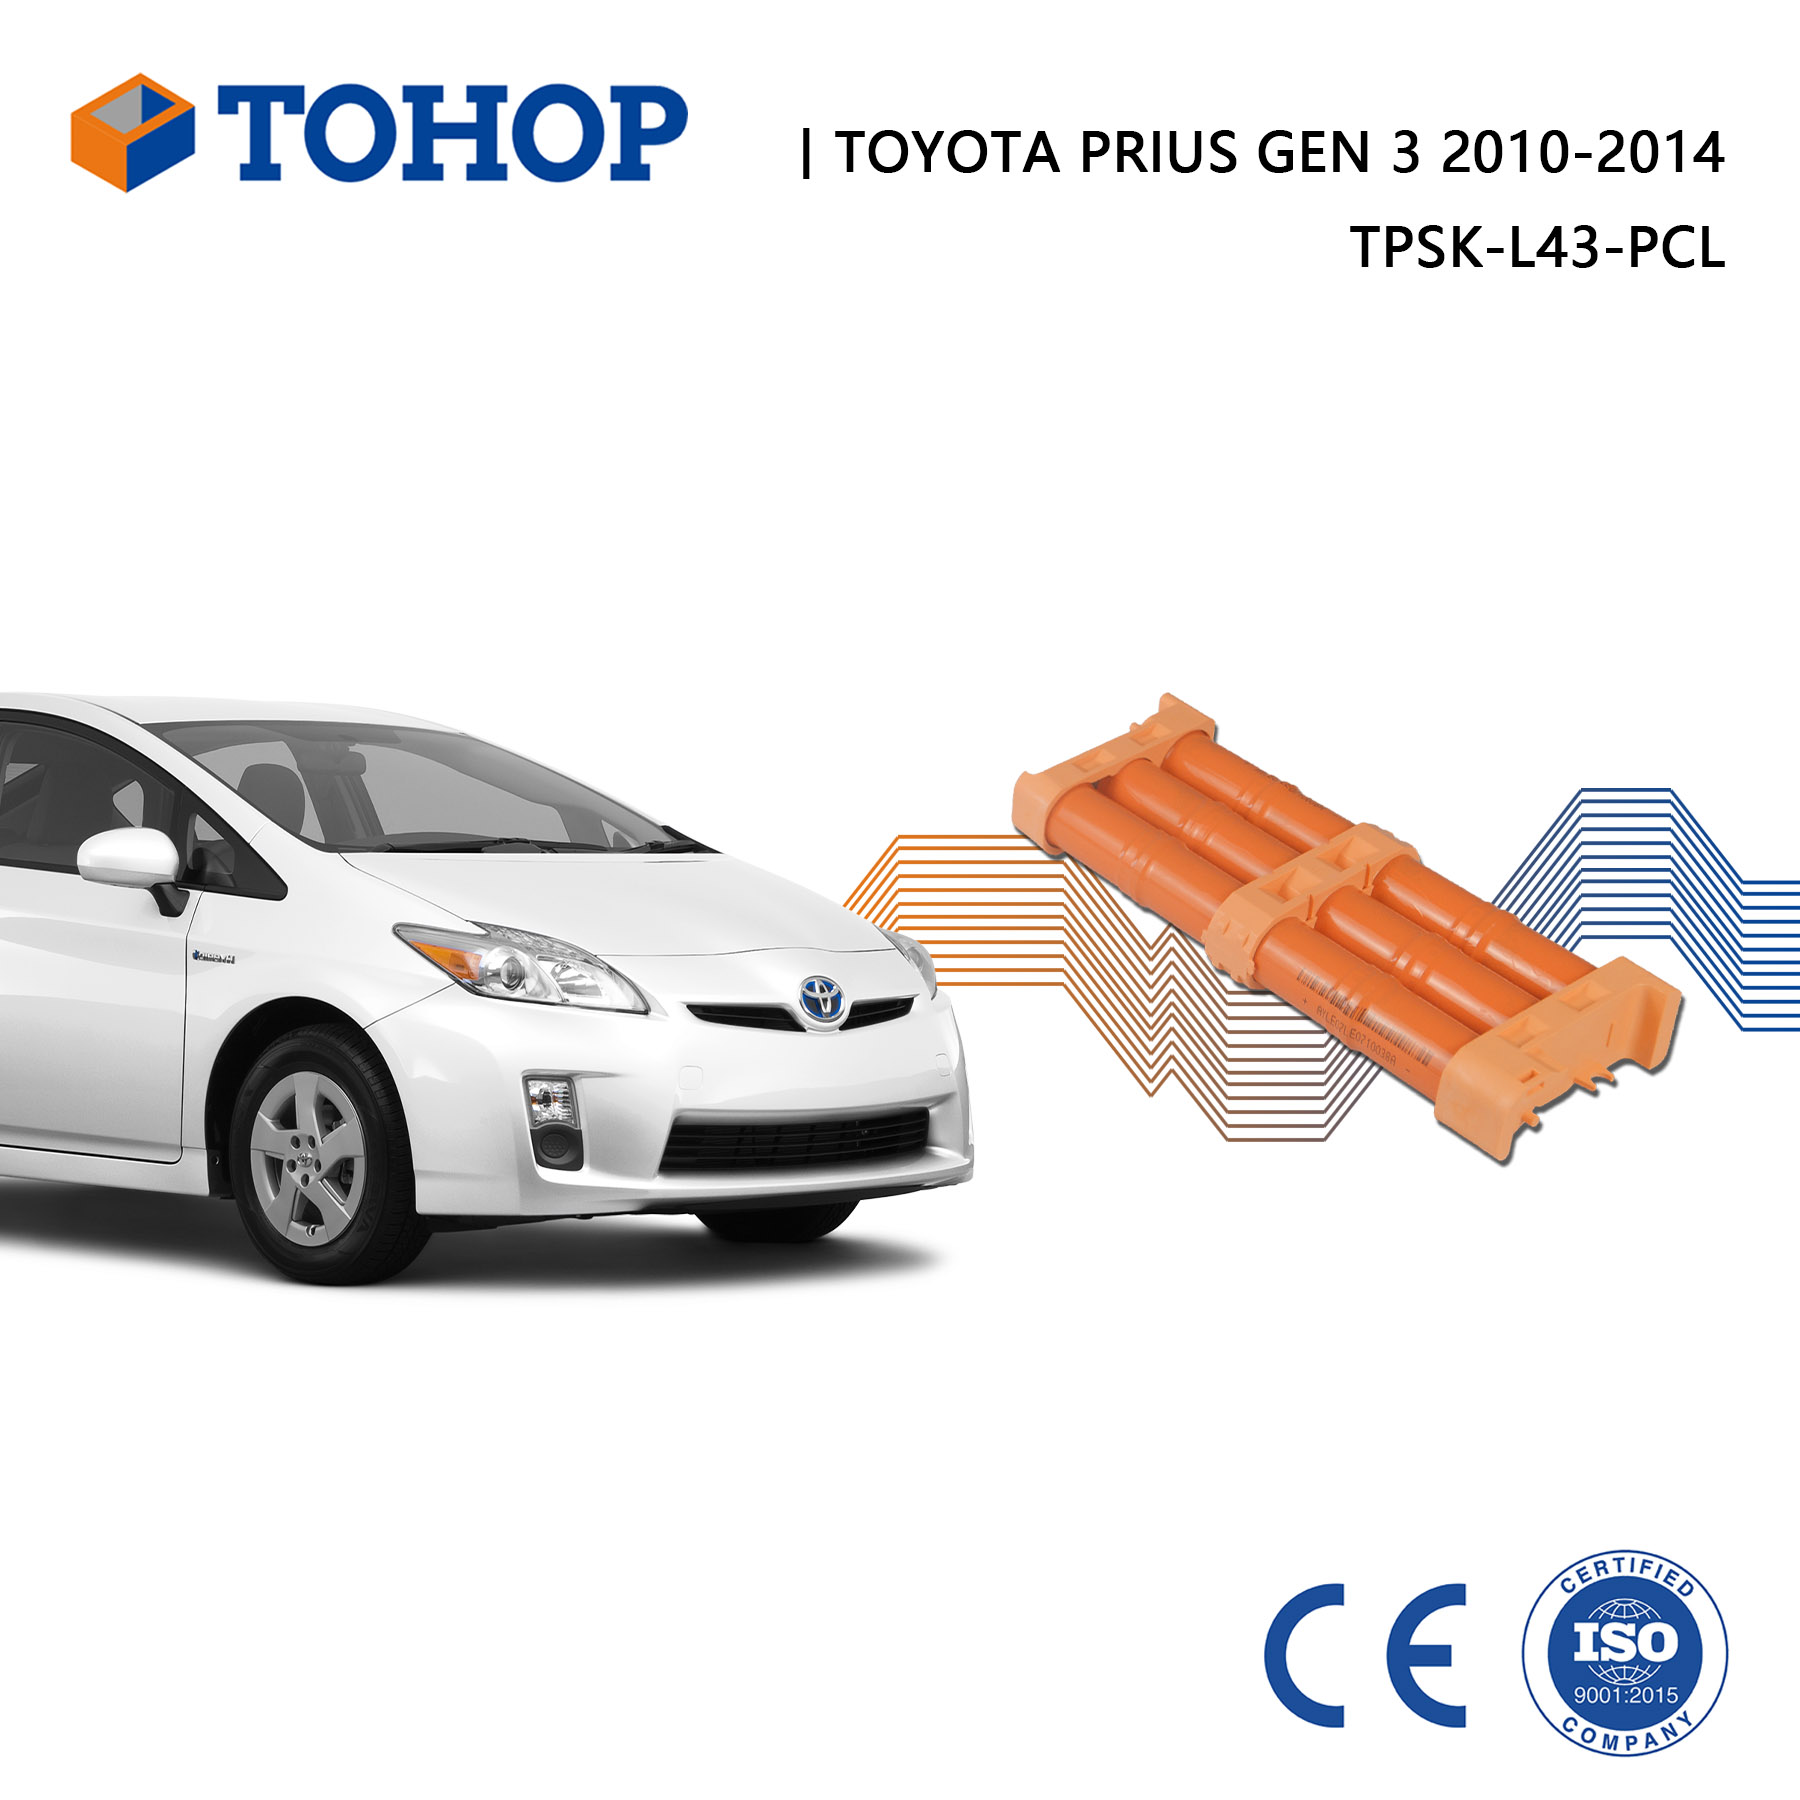 Toyota Gen 2 Prius Hybrid Battery Replacement Nimh Hybrid Battery Cell